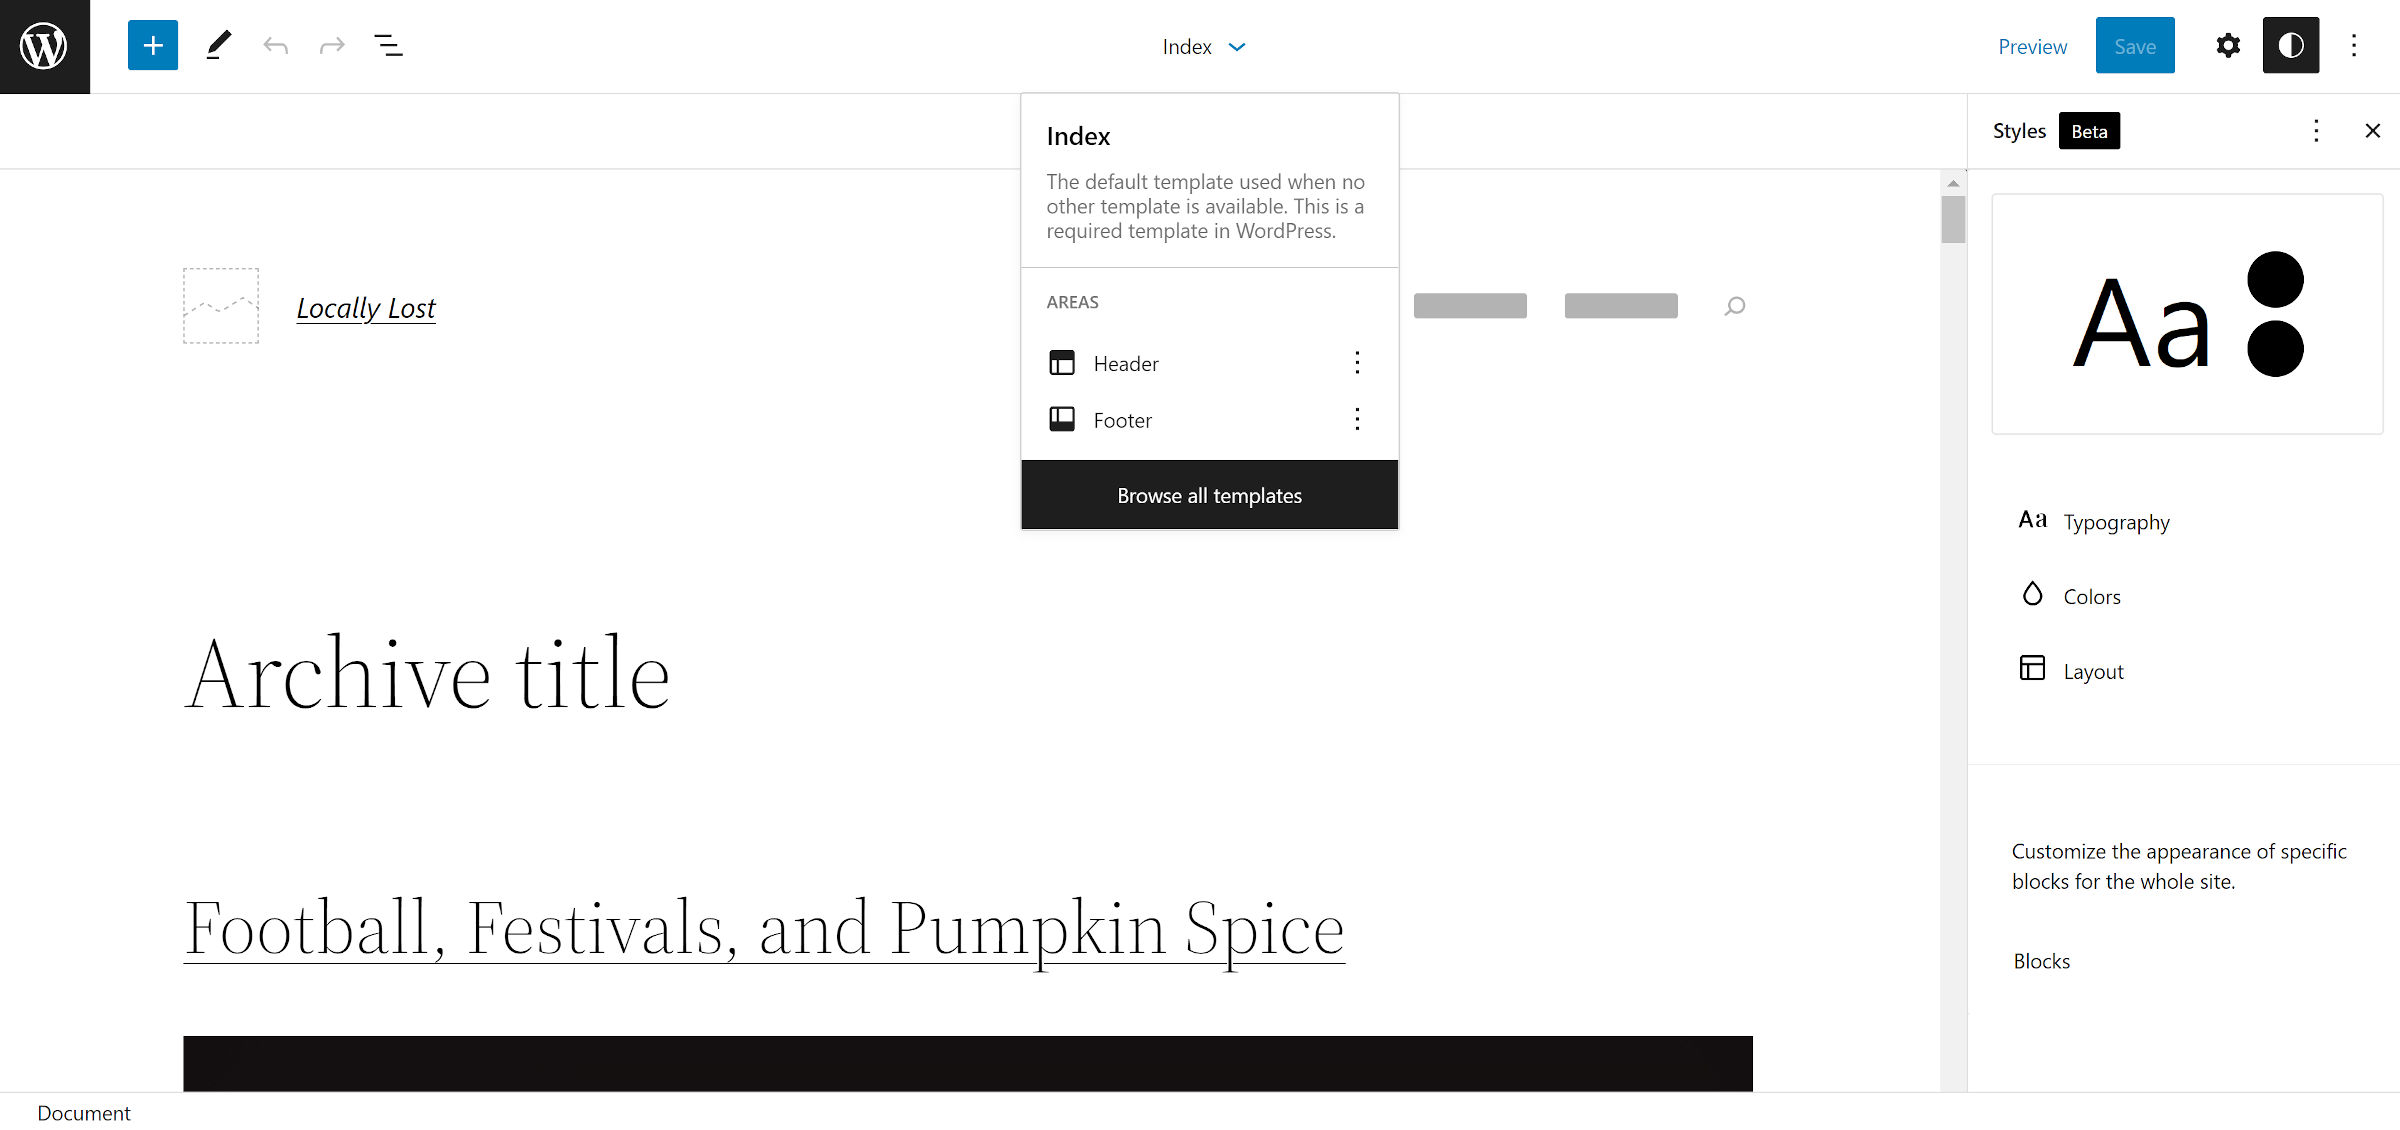 WordPress site editor.  Template editing canvas on the left, global styles options on the right.